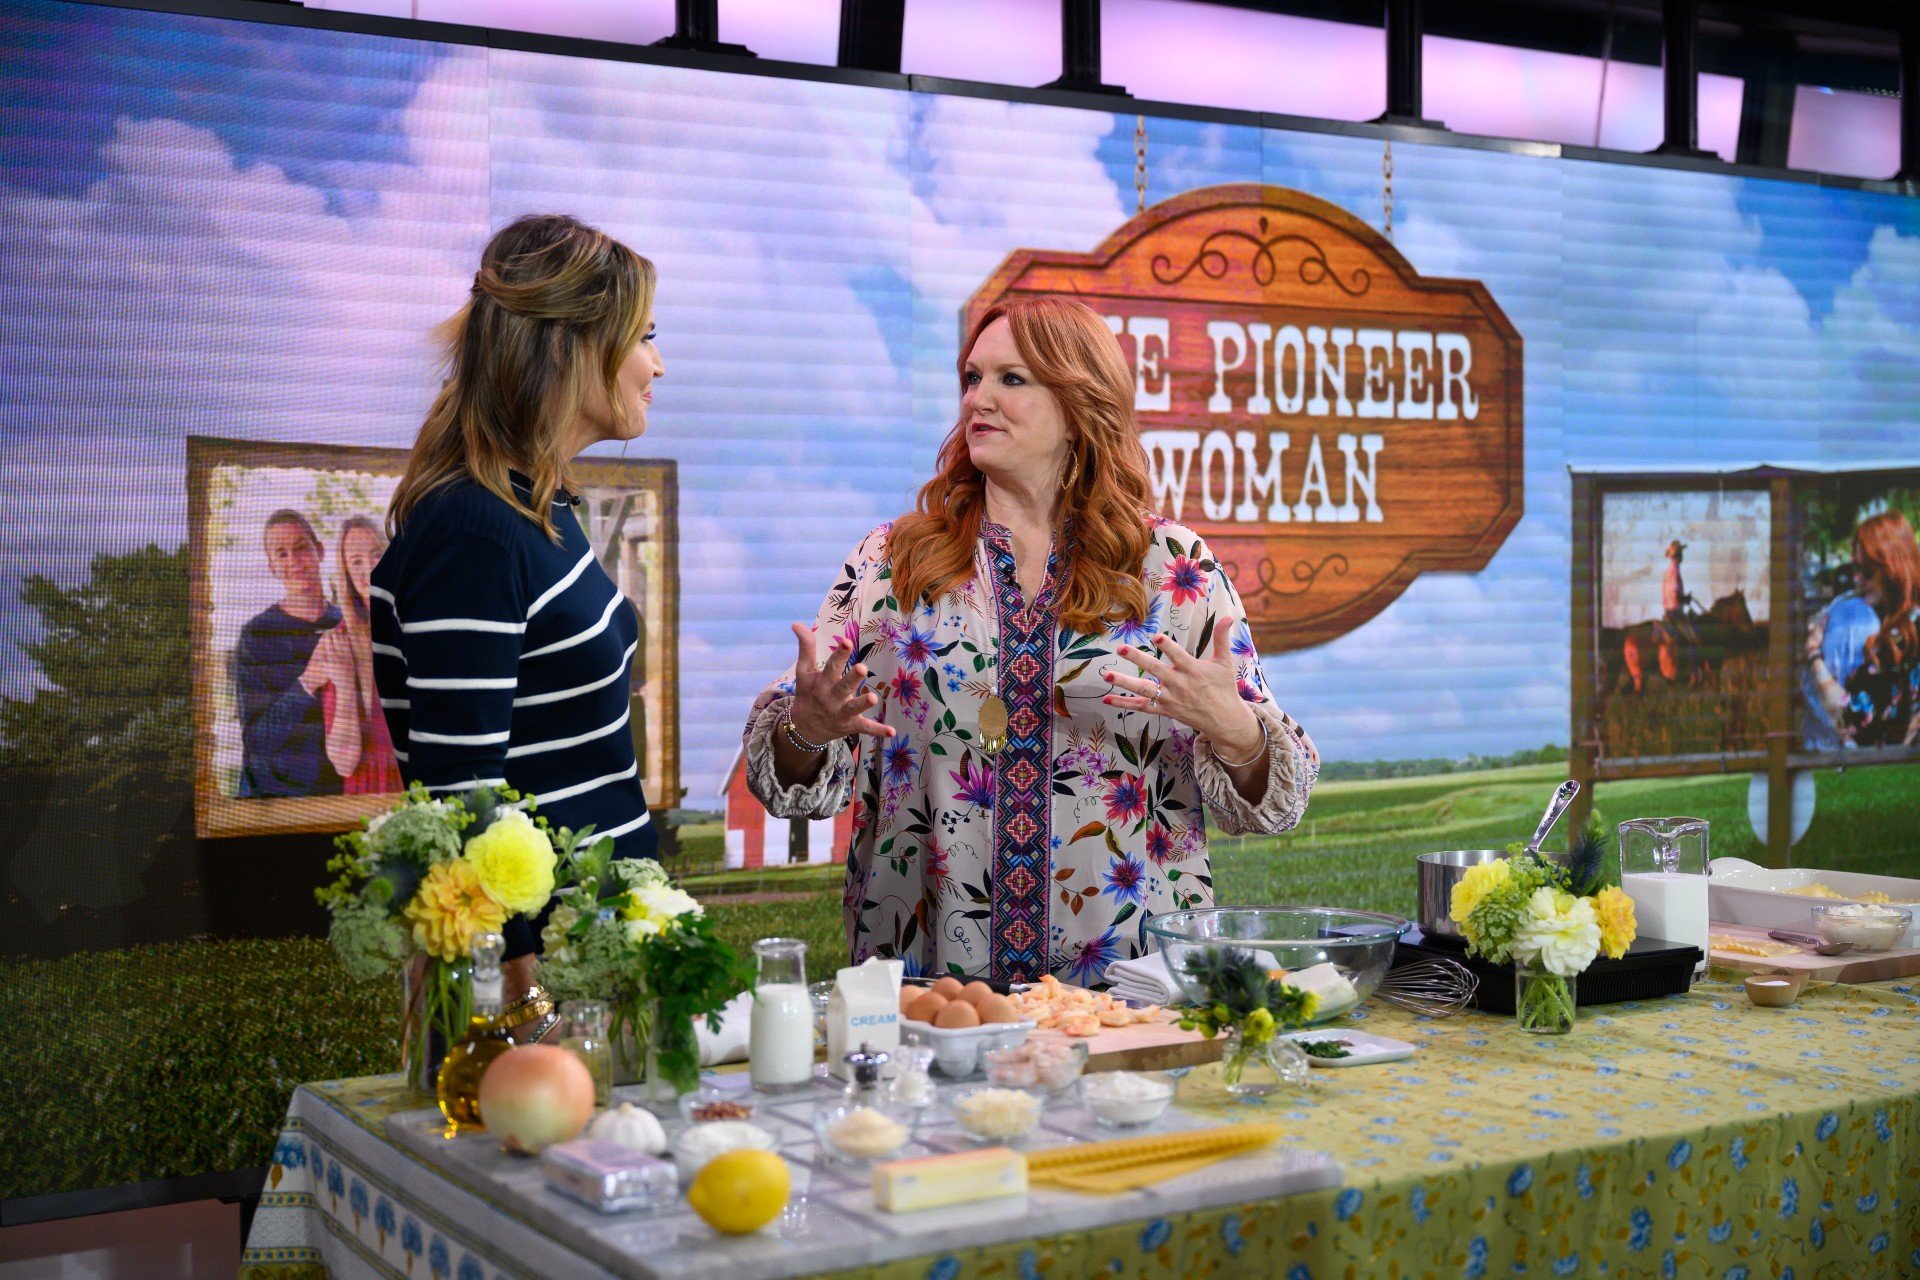 The Pioneer Woman Ree Drummond and Savannah Guthrie do a cooking demonstration on the Today show.